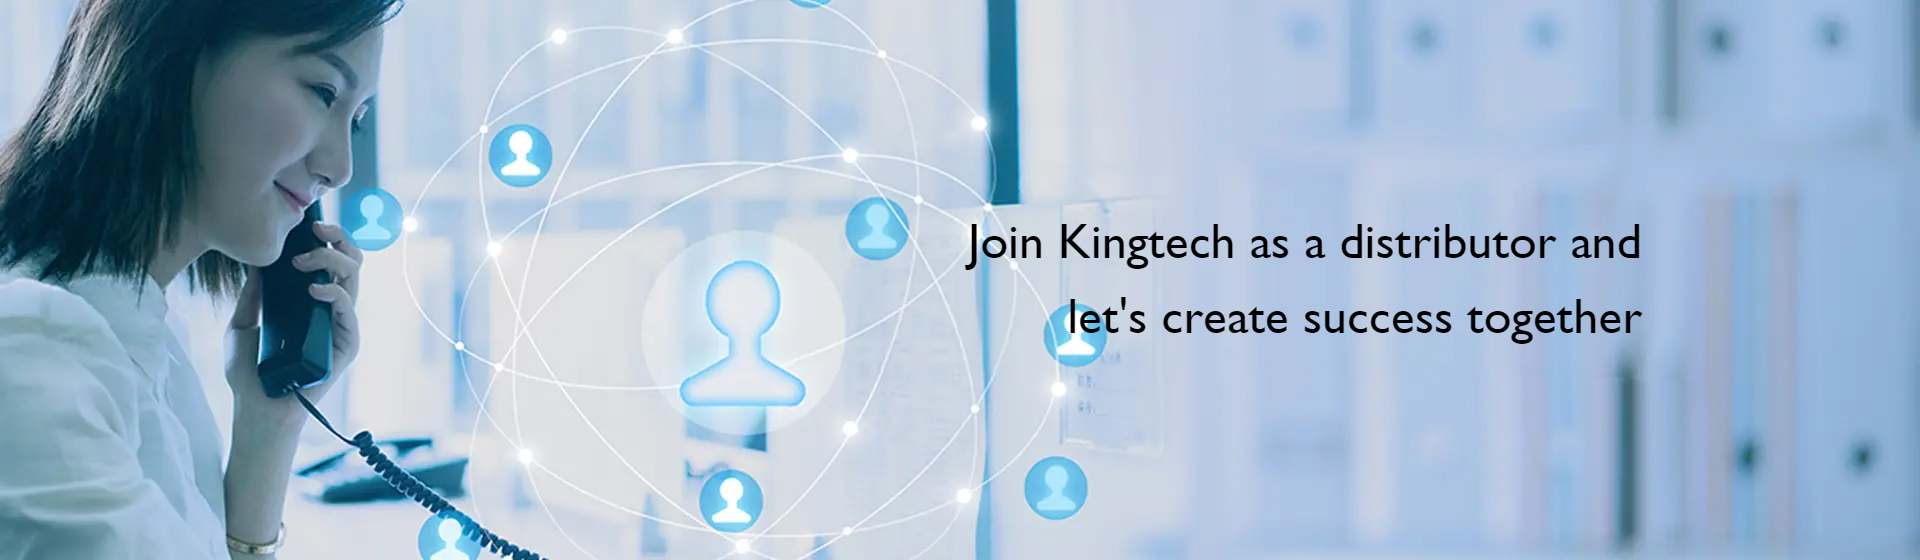 Join-Kingtech-as-a-distributor-and-let's-create-success-together